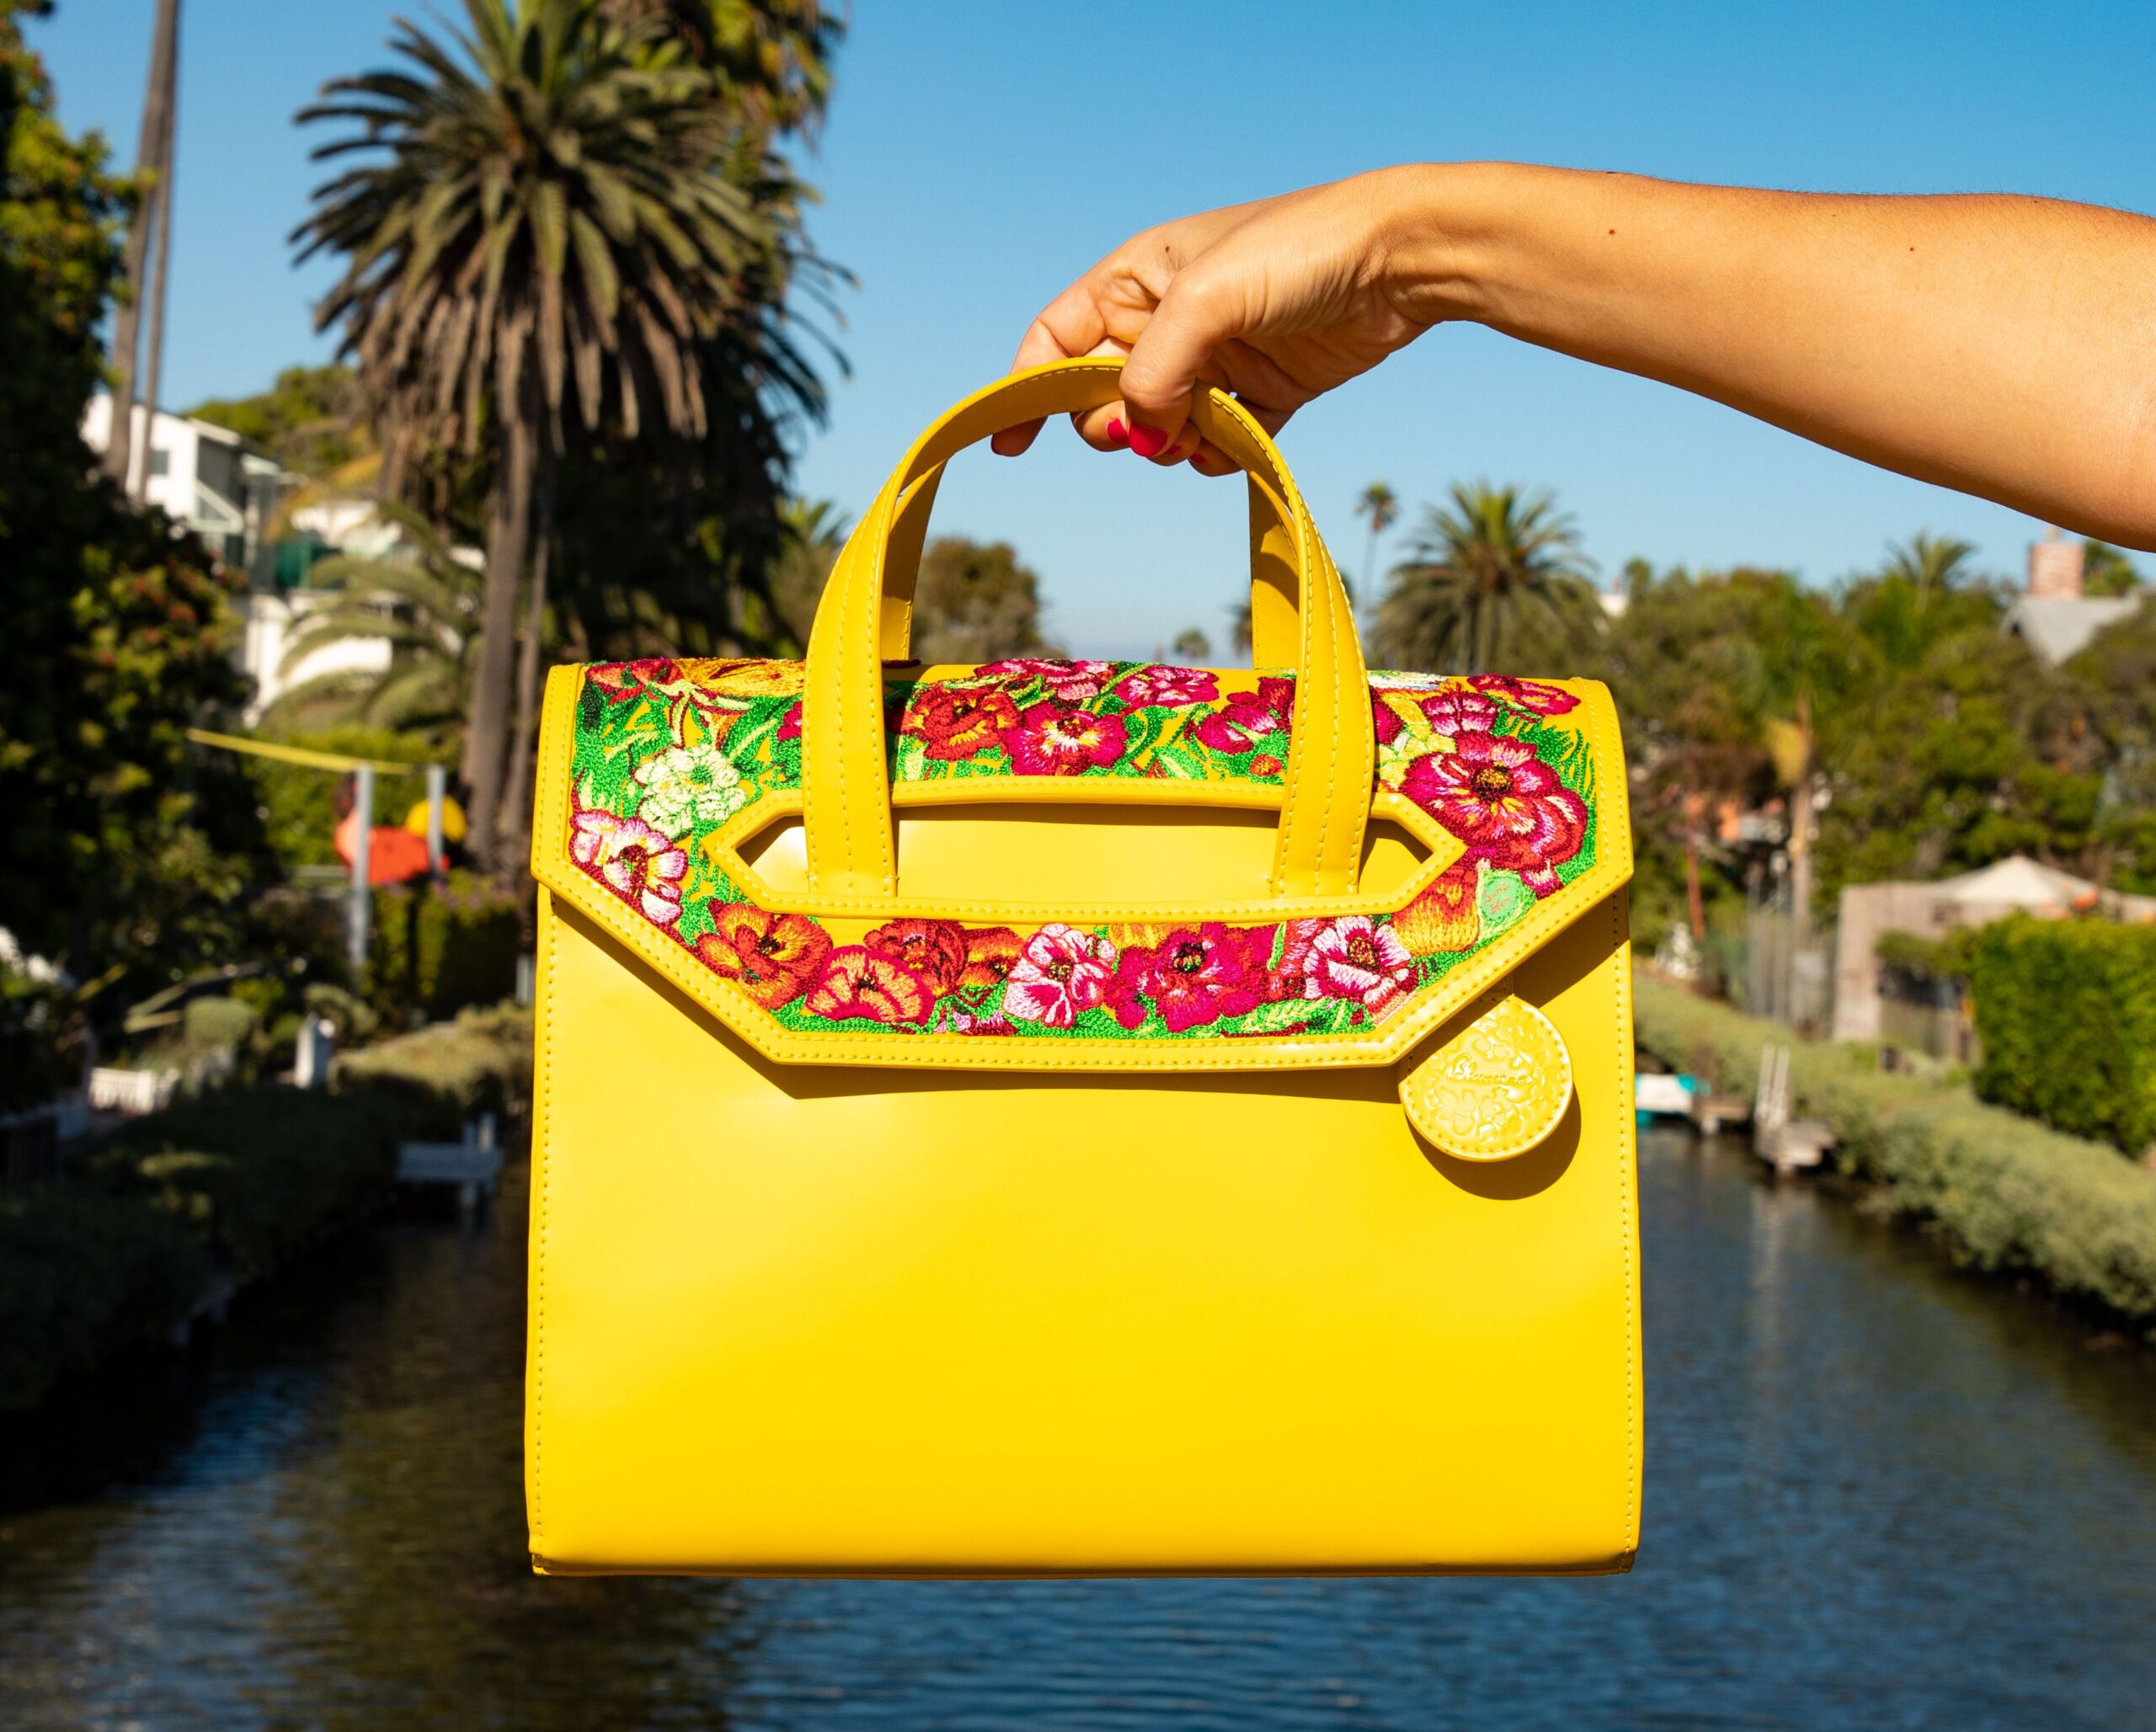 A bright yellow bag has embroidered pink poppies on it.